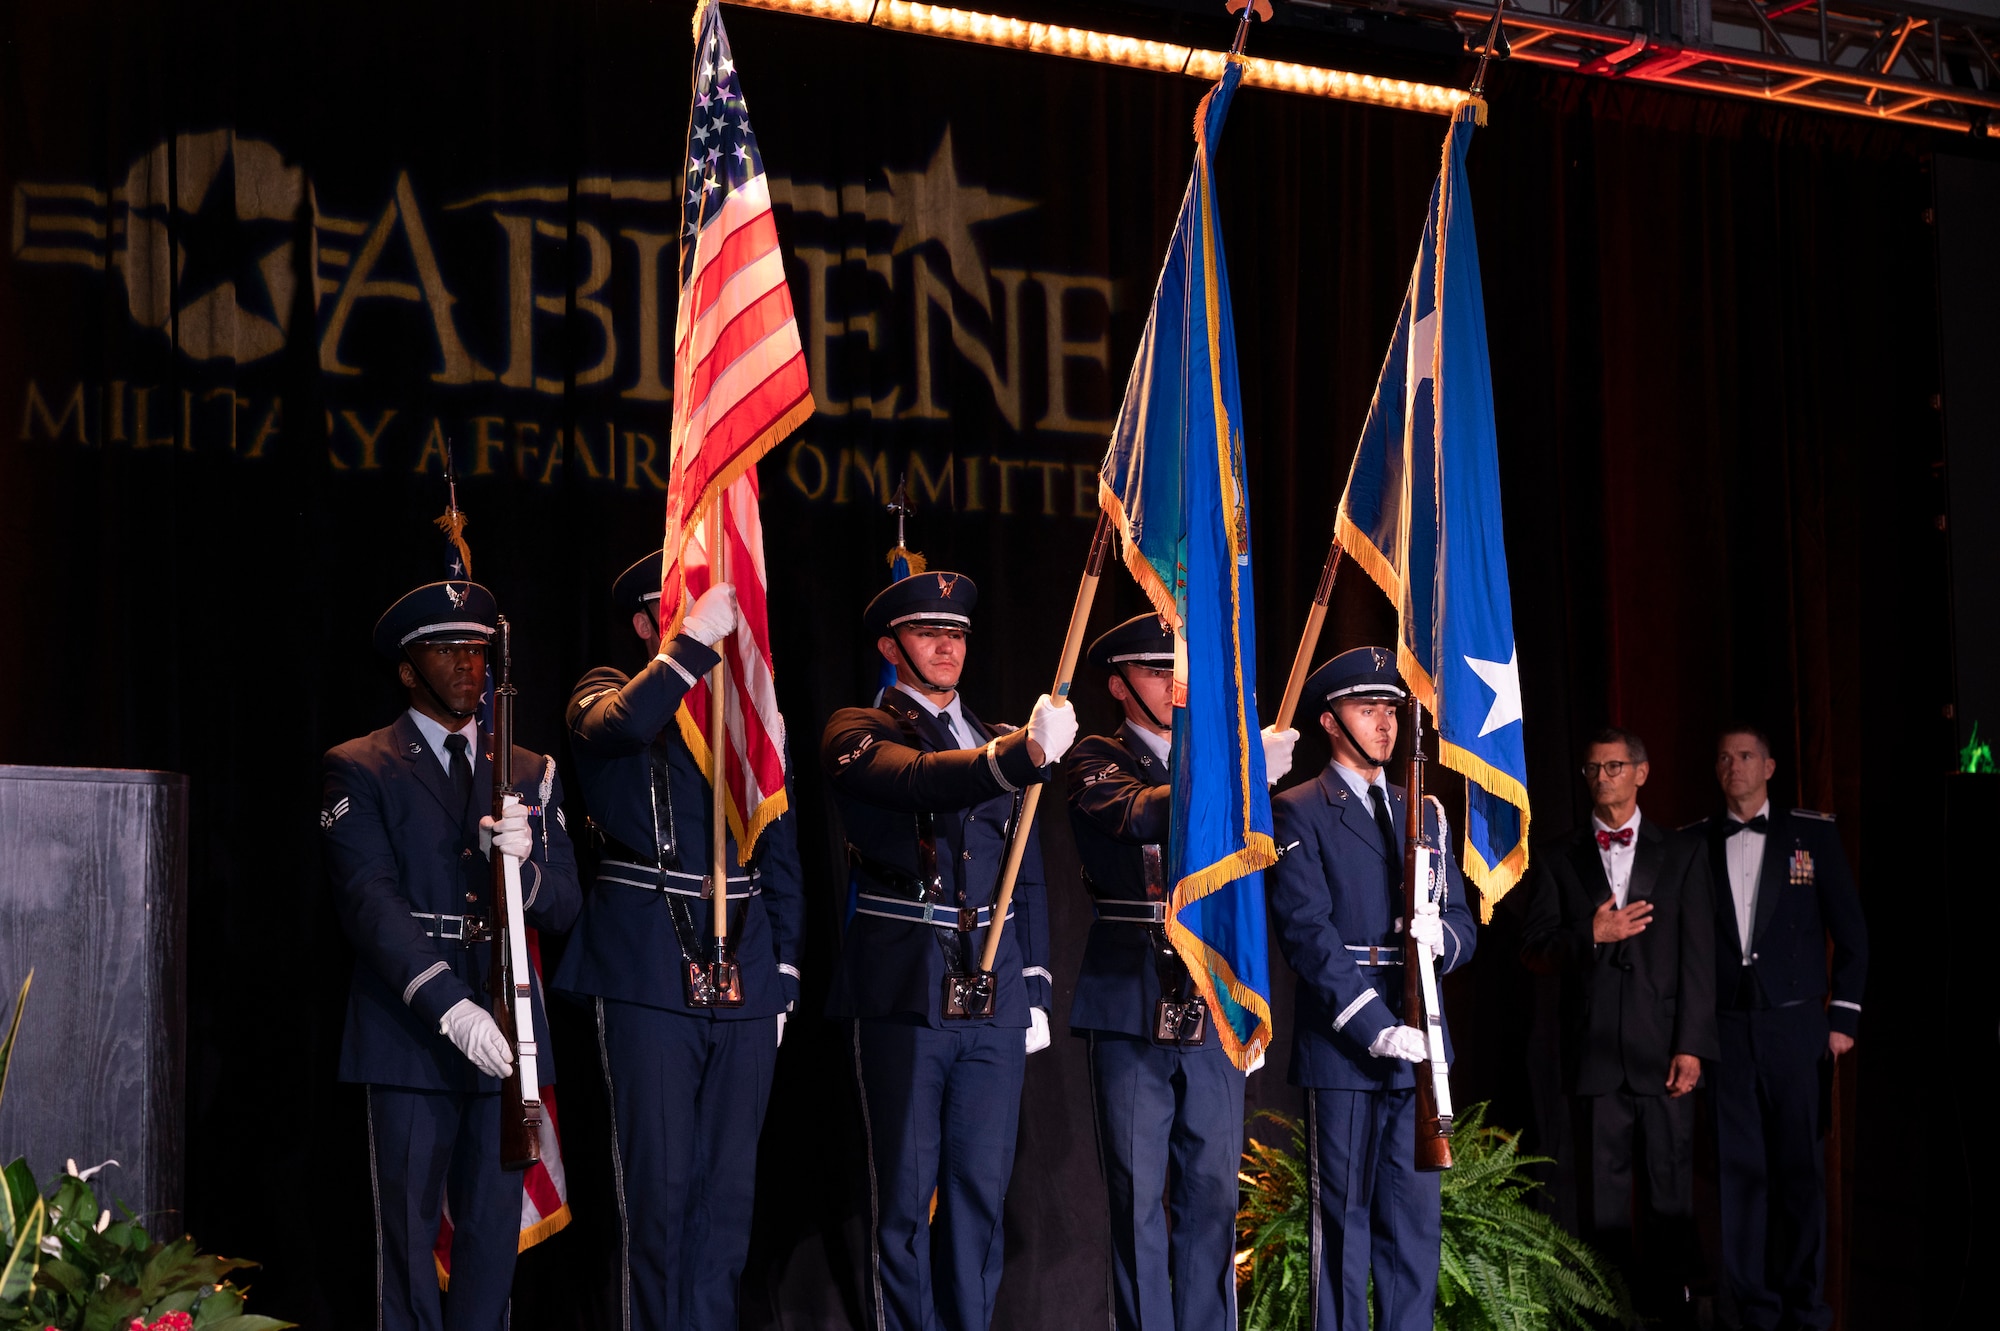 The Dyess Honor Guard presents the colors at the Abilene Military Affairs Committee and Dyess Air Force Gala in Abilene, Texas, Aug. 26, 2023. The event was held to celebrate the MAC’s 70th anniversary and the  Air Force’s 76th birthday. The Abilene MAC hosted the gala to honor Dyess Airmen and the legacy they have created at America’s only Lift and Strike Base.